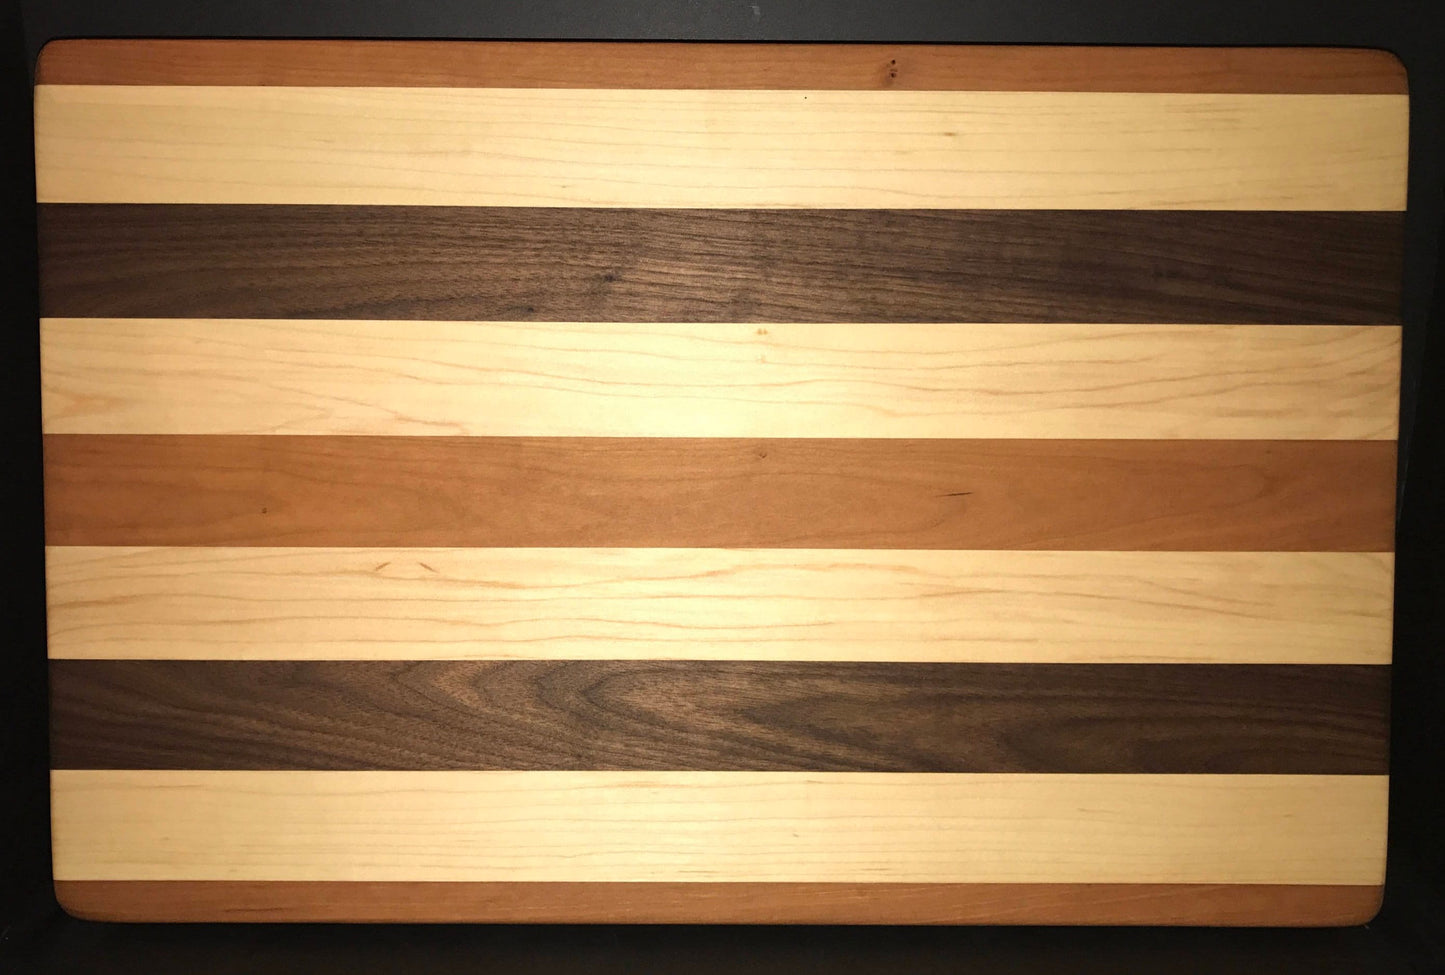 13” X 18” X 1.5” Custom Made Cutting Board Created Out Of Cherry, Black Walnut, and Maple